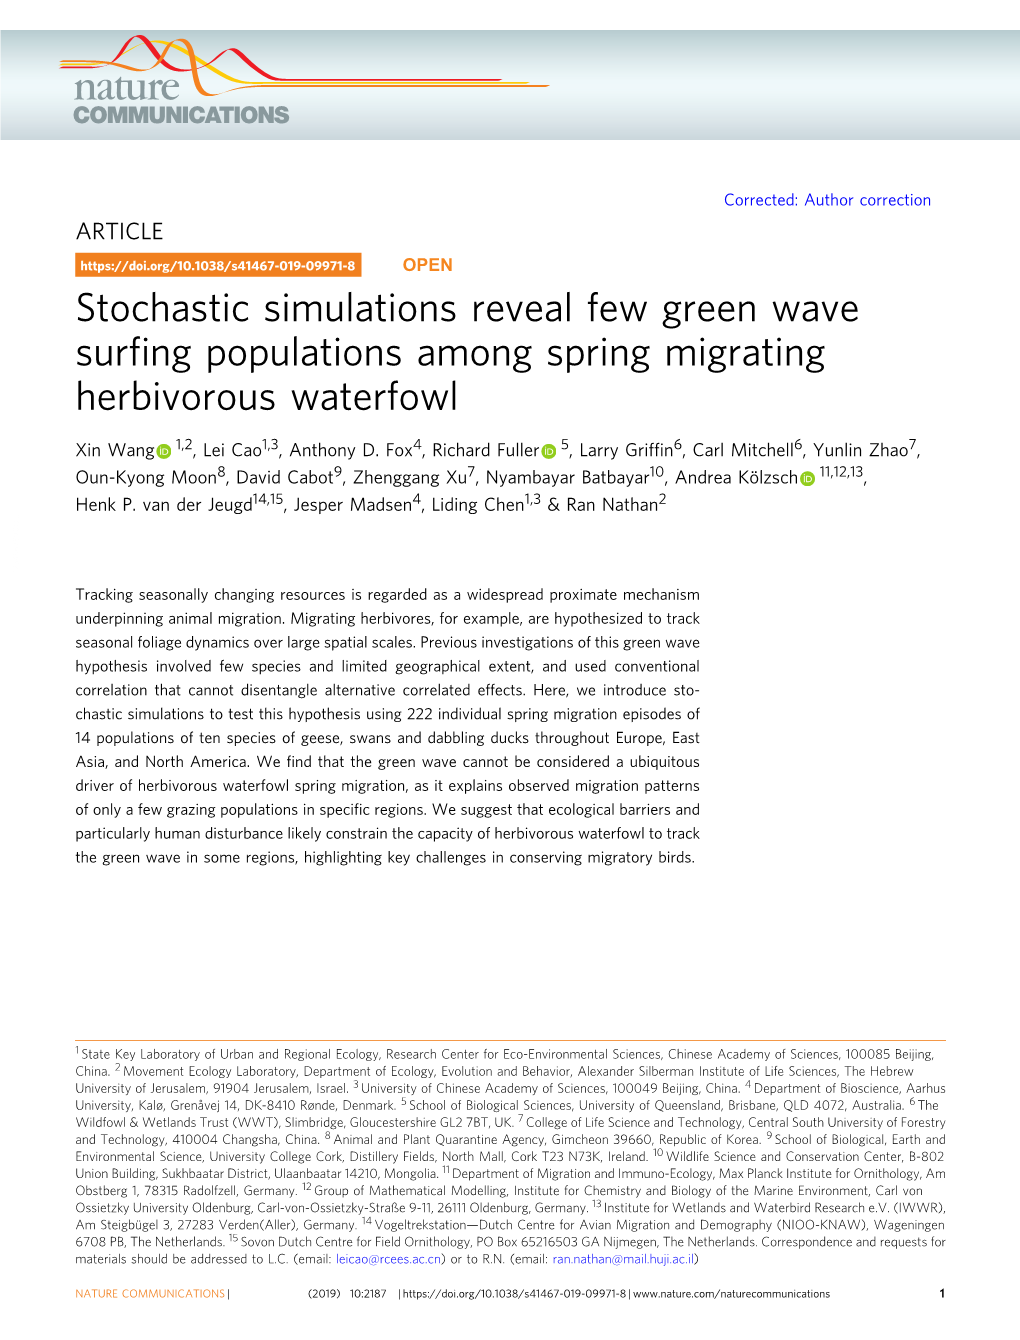 Stochastic Simulations Reveal Few Green Wave Surfing Populations Among Spring Migrating Herbivorous Waterfowl